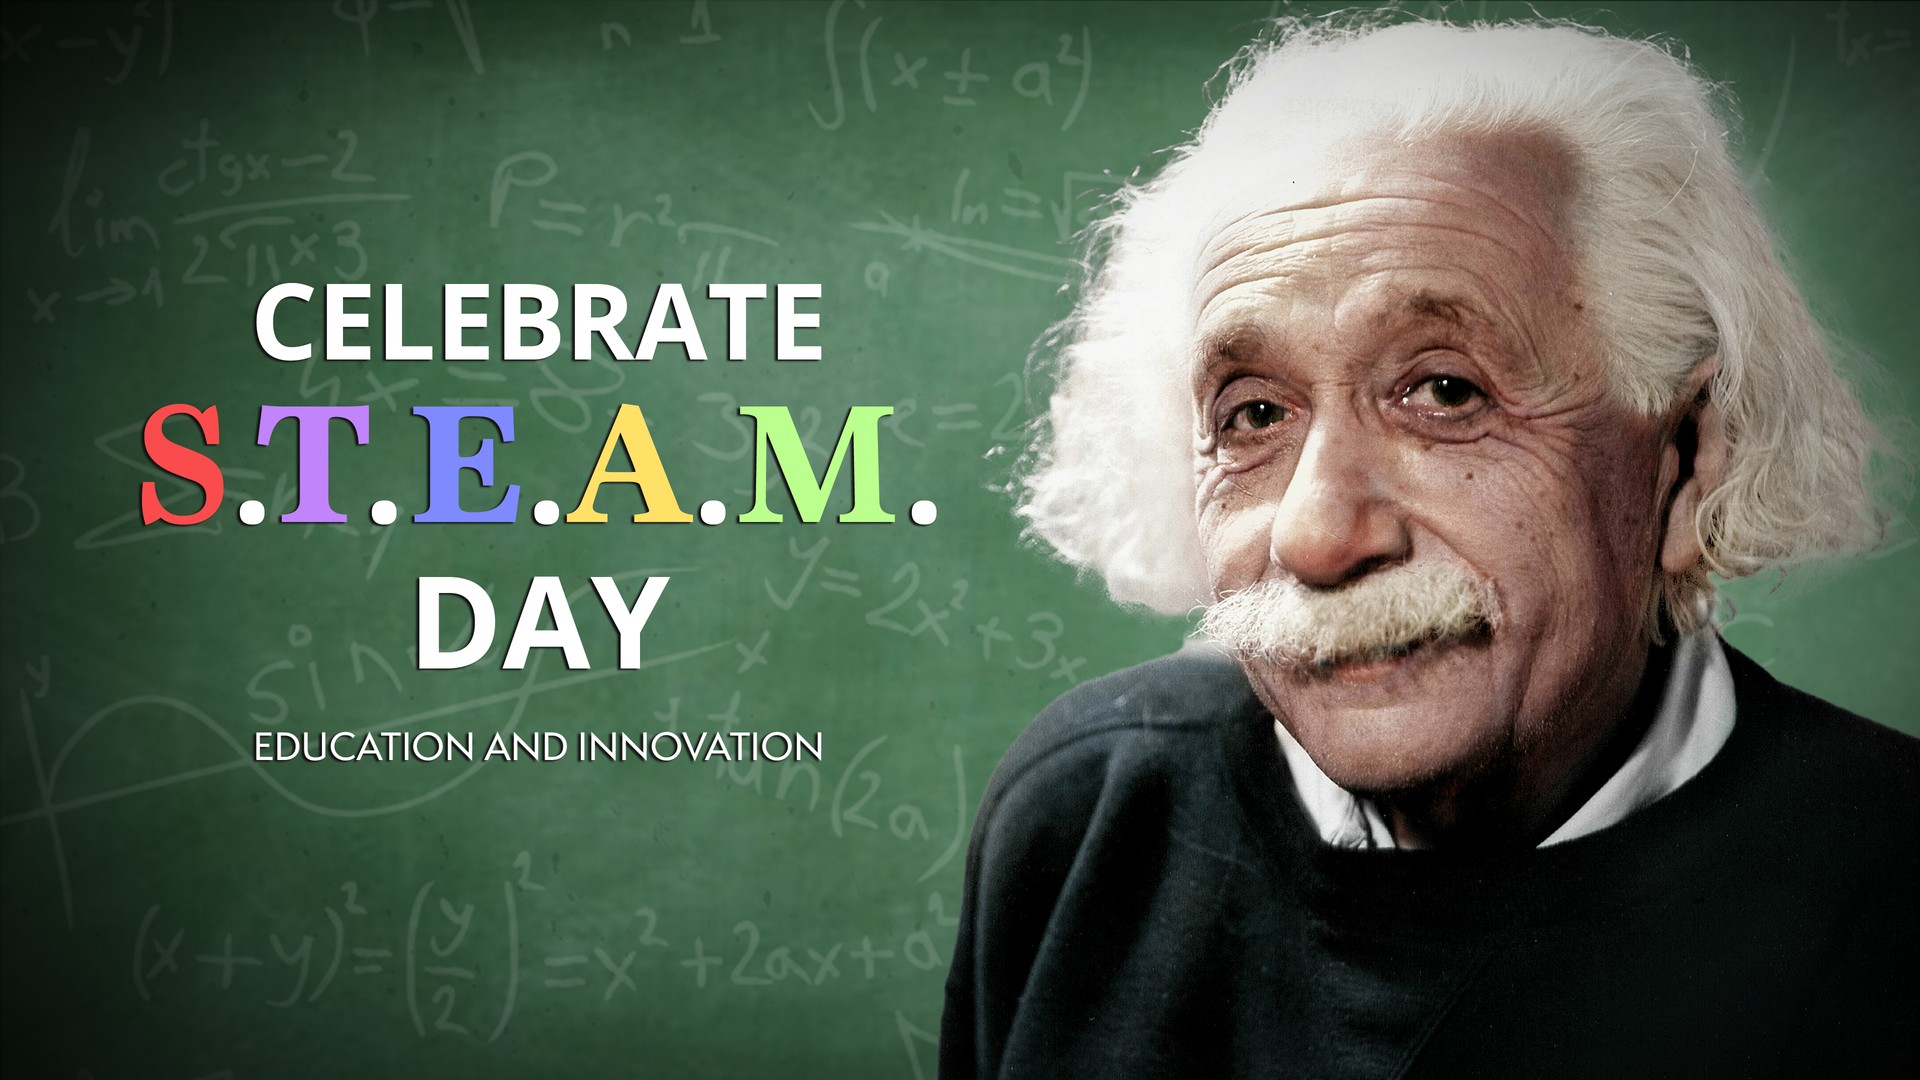 S.T.E.A.M. Day: Education and Innovation